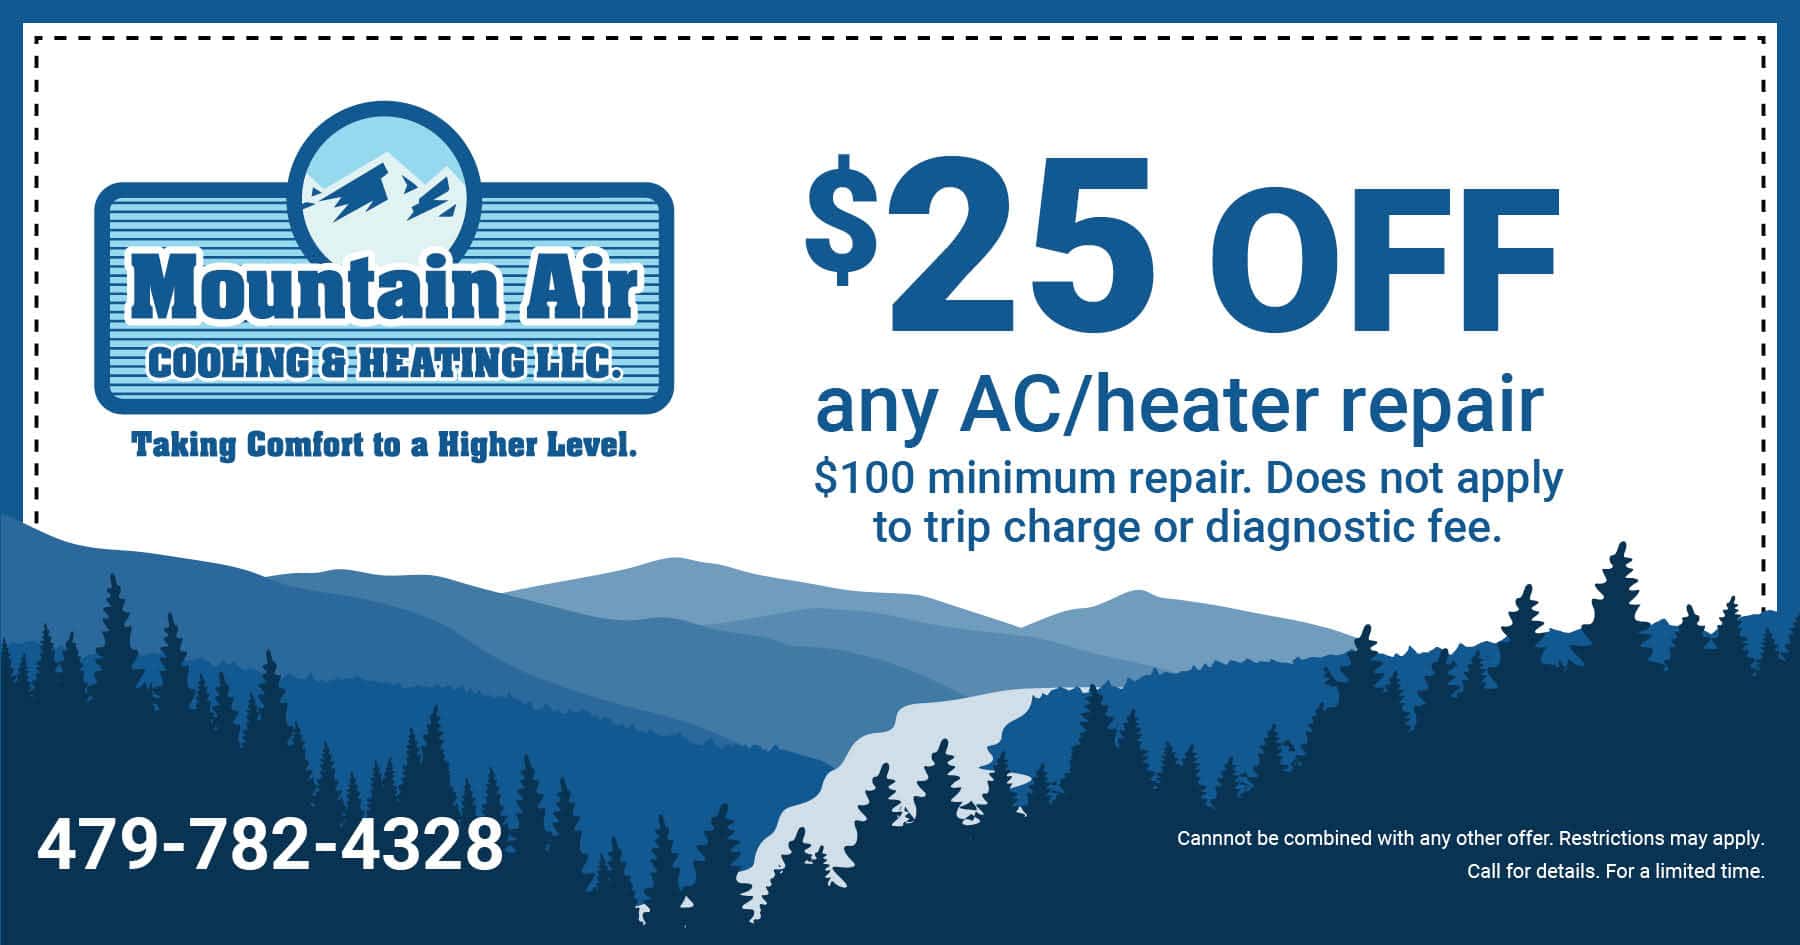  OFF any AC/heater repair 0 minimum repair. Does not apply to trip charge or diagnostic fee. Cannot be combined with any other offer. Restrictions may apply. Call for details. For a limited time.